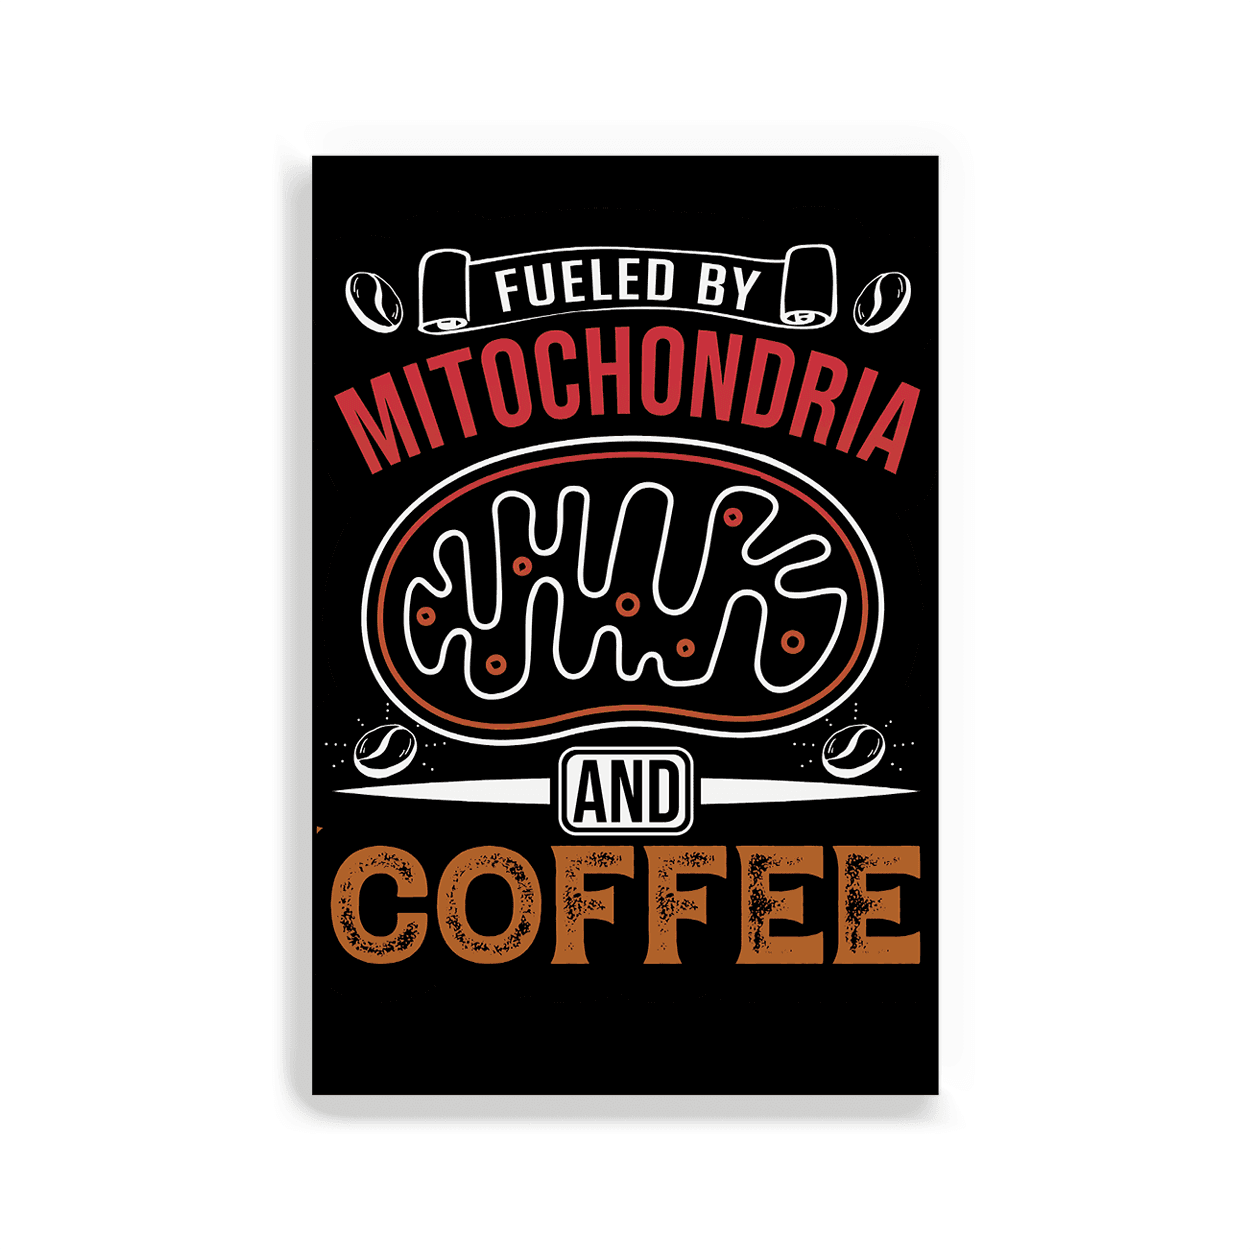 Fueled by Mitochondria and Coffee - 2x3 Magnet